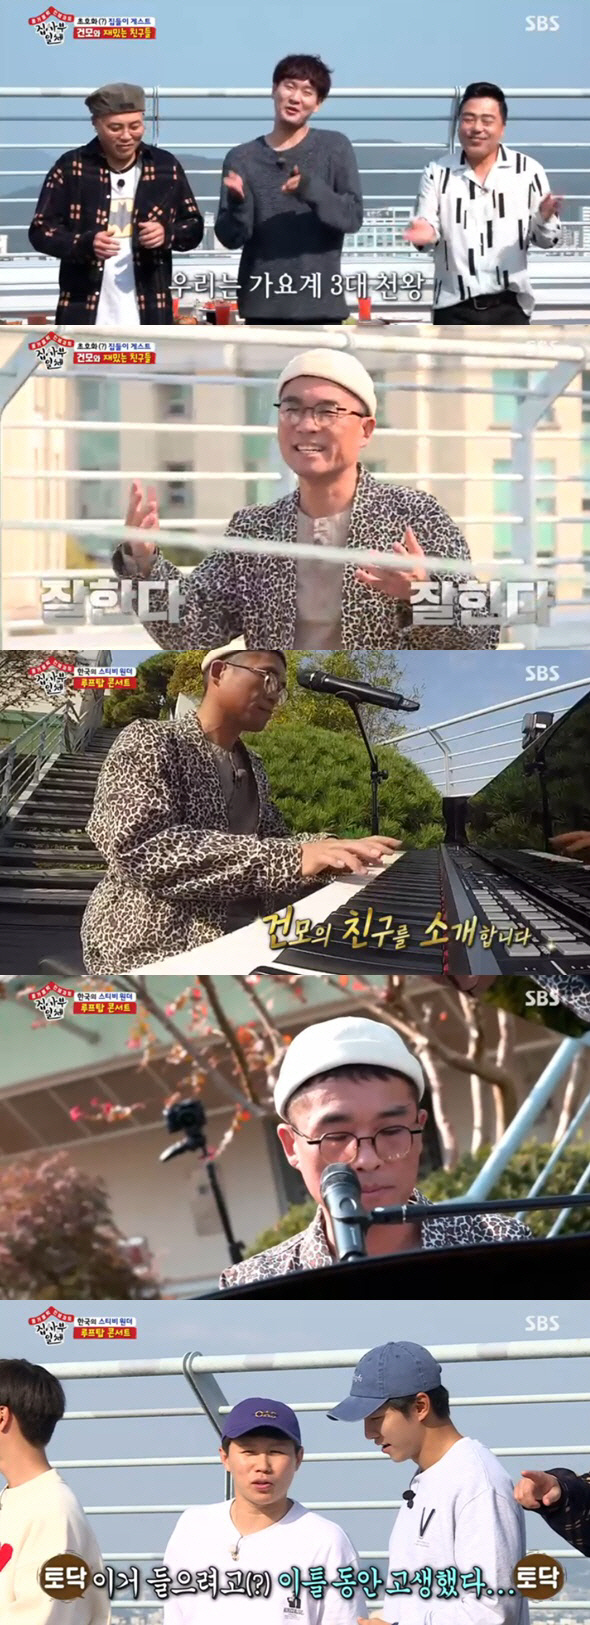 Lets be happy and dont get sick, Kim Gun-mo said, as she delivered a sweet Serenade to the bride-to-be.SBS entertainment program All The Butlers broadcasted on the 10th was broadcast on Kim Gun-mo master after last week.Kim Gun-mos special Housewarming, who moved into the new home, entertained viewers.Kim Gun-mo, along with members of All The Butlers, turned the rice cake to the neighbours around the new home.It was to express gratitude to the neighbors who agreed to the construction despite the damage such as noise due to the interior construction of the new house.Especially, this rice cake was more meaningful because it was made by pianist Jang Ji Younn, a pre-priest.Jang Ji Younn was caught on the camera and collected his attention.The members pressed each doorbell of their neighbors house and delivered rice cake, and the neighbors responded with a warm smile.After turning the rice cake, Kim Gun-mo opened a Music classroom for members; the key message in the Kim Gun-mo table Music classroom was: Music is play.The members admired the national singer One Point lesson, saying, This is a class for how much.Kim Gun-mo was an national singer and created a new melody with melodian with various Feelings, which gave the members an admiration.Kim Gun-mo said, If something comes into my head, I will do music properly from that time. Music showed his musical philosophy of music is fun in a working way.Kim Gun-mo gave members musical instruments such as triangles and recorders to the members, saying, I want to deal with the instruments one by one. He started his hit song Excuse.Here, Yang Se-hyeongs sensible beatbox and Lee Seung-gis vocals were added to complete the excuse of a different feeling.Kim Gun-mo was also pleased with the members who enjoyed Music.The highlight of Housewarming was Kim Gun-mos Rooftop Mini Live concert.Kim Gun-mo was a 100% musician who collected a playful game and sat in front of the piano and showed sweet music.I was singing a hit song medley such as Im sorry and Beautiful farewell Seoul Moon , and all the members who listened to it could not hide their thrilling expression.I have been suffering so far to listen to this song, he confessed to his heart and laughed.Kim Gun-mo called Lee Seung-gis My Girl at the end of the day.The song was I am happy, I am happy, I am not sick, I do not eat food, I do not eat it, and I love you, which sounded like a love serenade to the bride-to-be Jang Ji Youn.Meanwhile, Kim Gun-mo and Jang Ji Younn will be married at the Seoul Motivation on January 30 next year.The two men met with the introduction of their acquaintances last winter and found that they had grown love for a year.